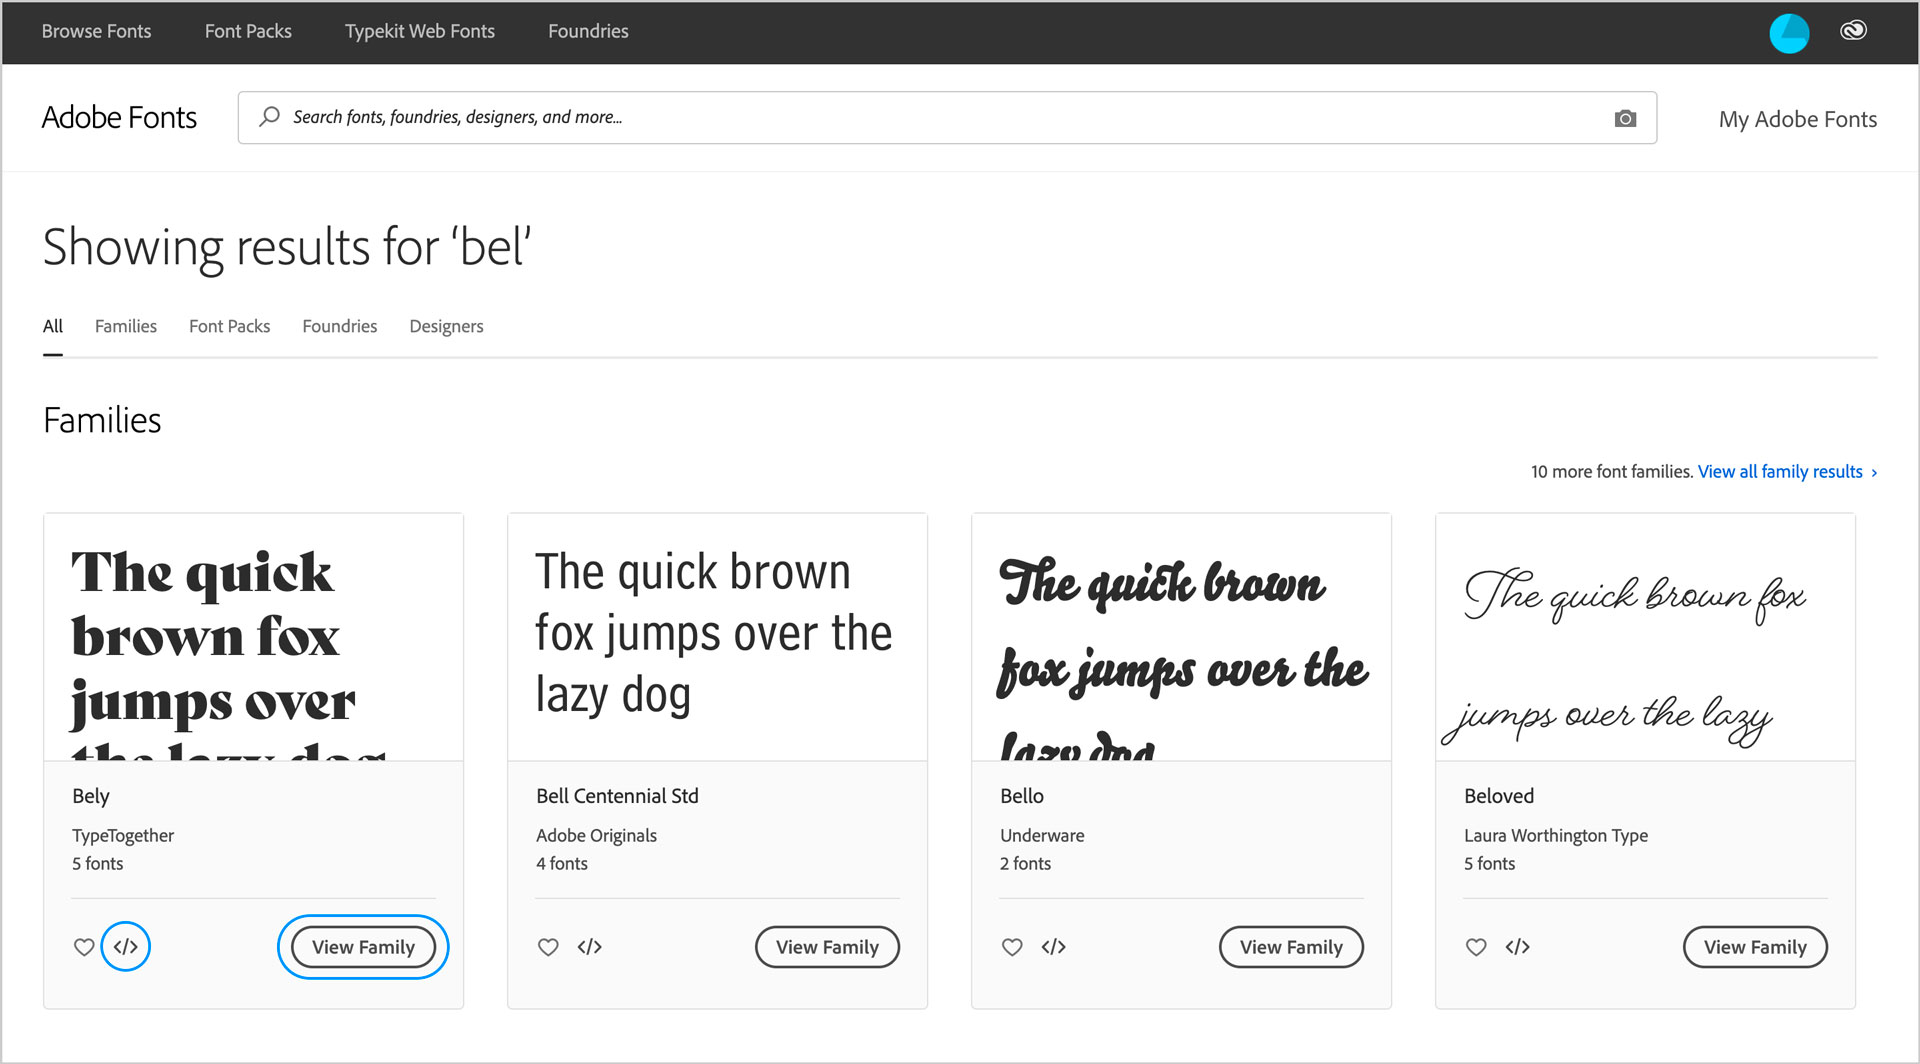 ADOBE FONTS SEARCH RESULTS